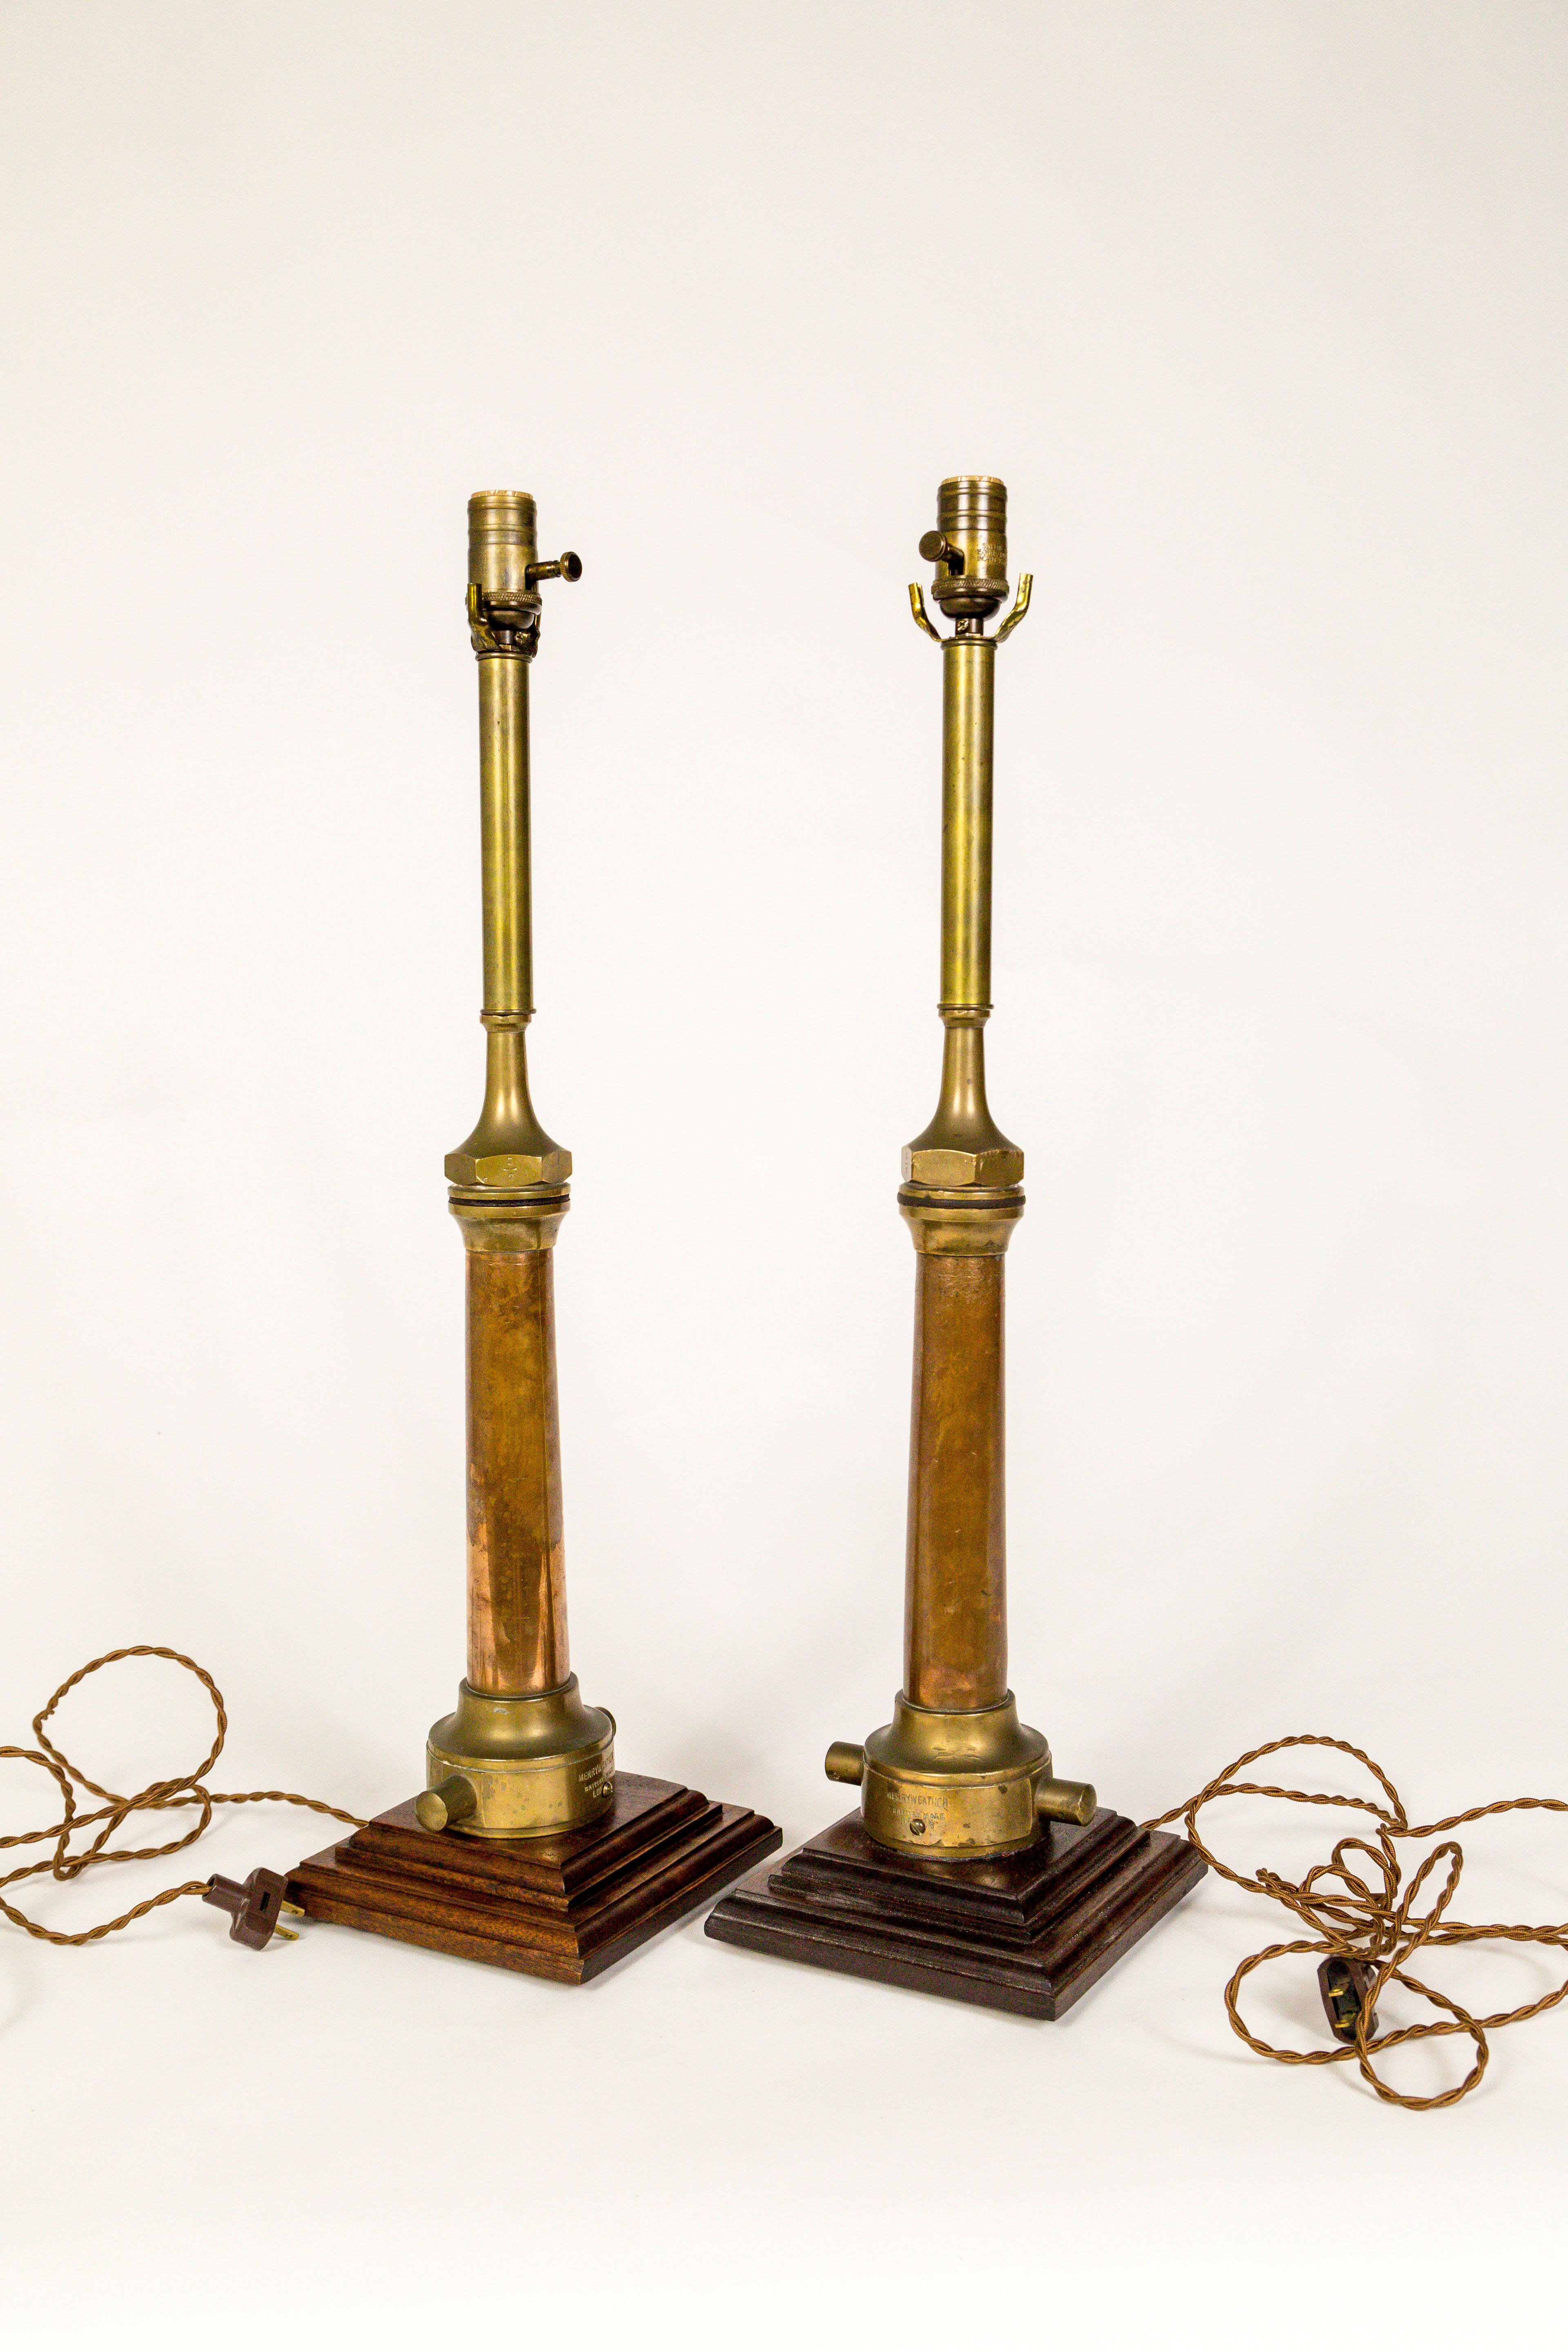 A handsome pair of table lamps made from antique, copper and brass, Victorian fire hose nozzles on walnut wood bases. Imprinted 